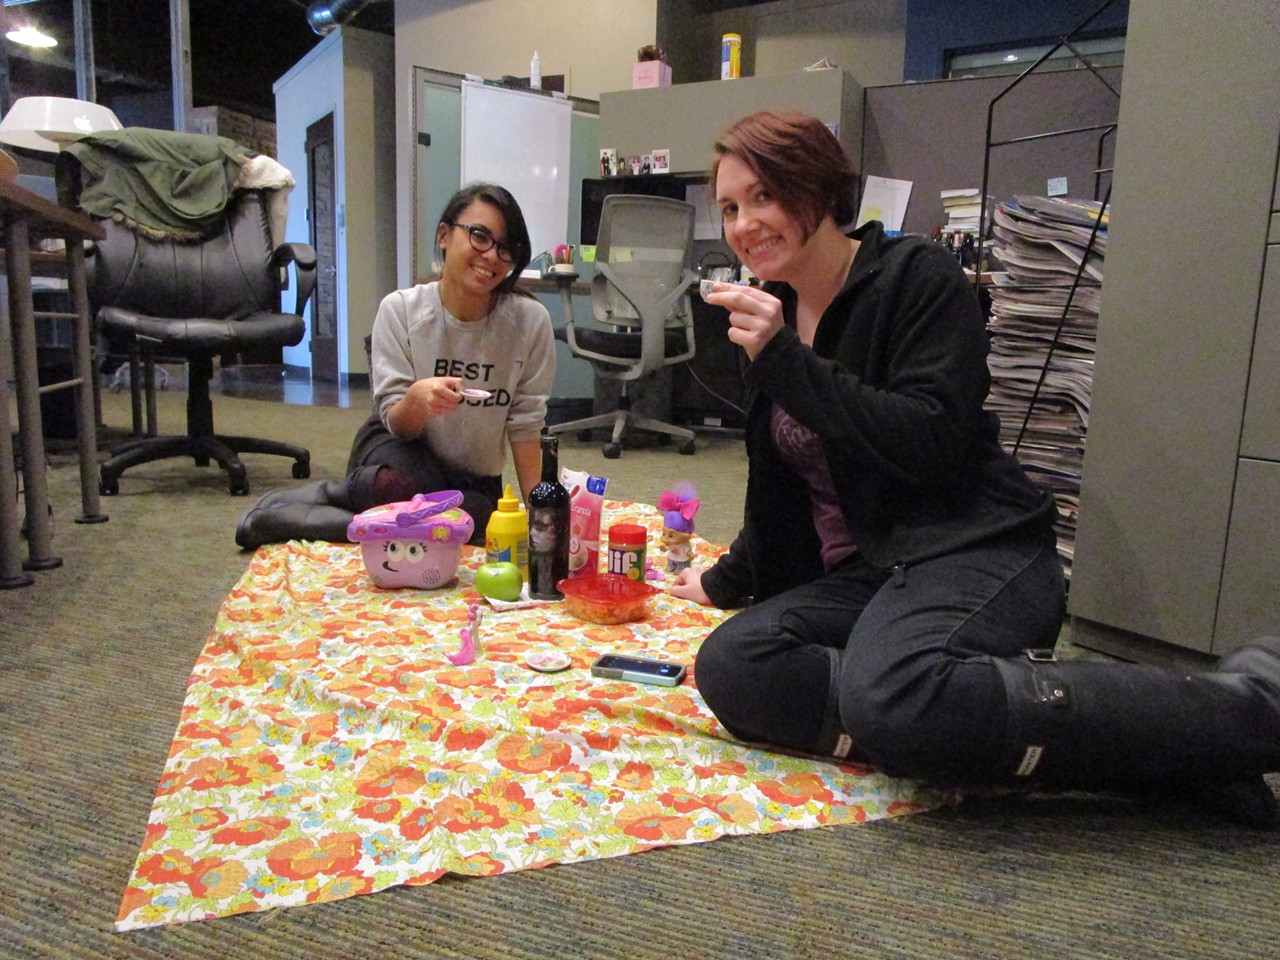 Have an indoor picnic
Spread a blanket on the ground, grab whatever you were gonna have for lunch anyway and dig in. Bonus points if wine and troll dolls are involved. (Photo by Michael Jackman)